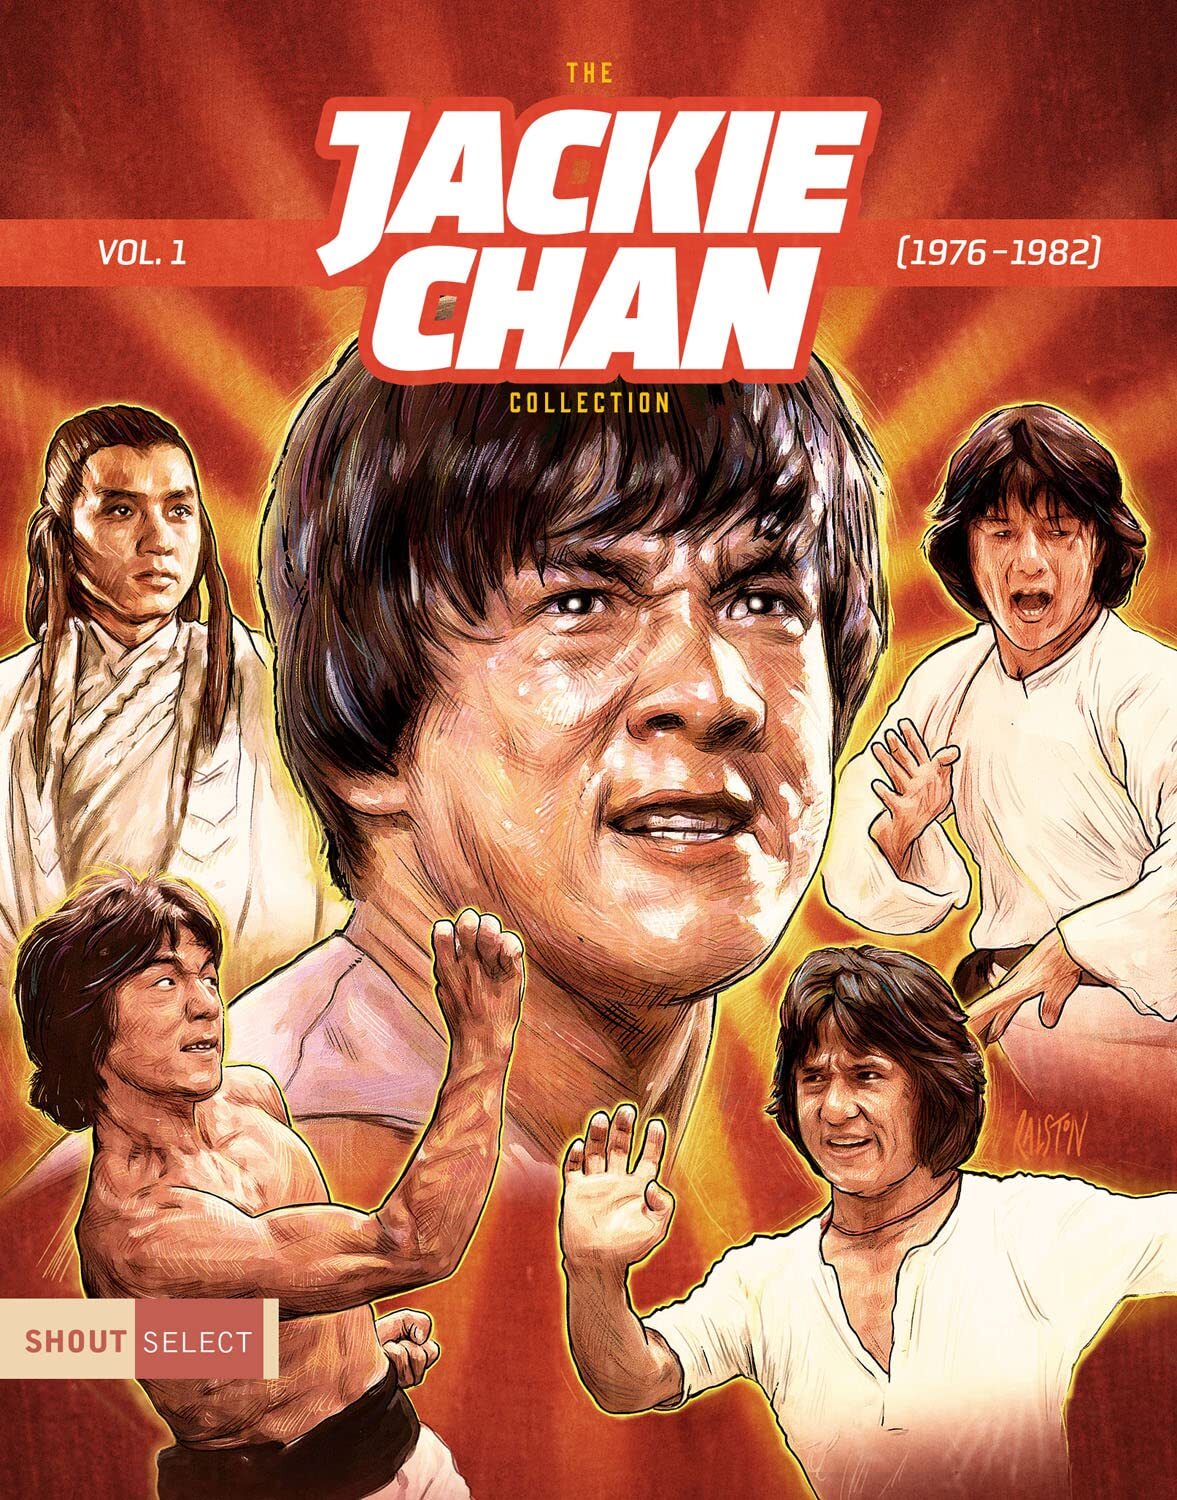 THE JACKIE CHAN COLLECTION VOLUME 1 BLU-RAY